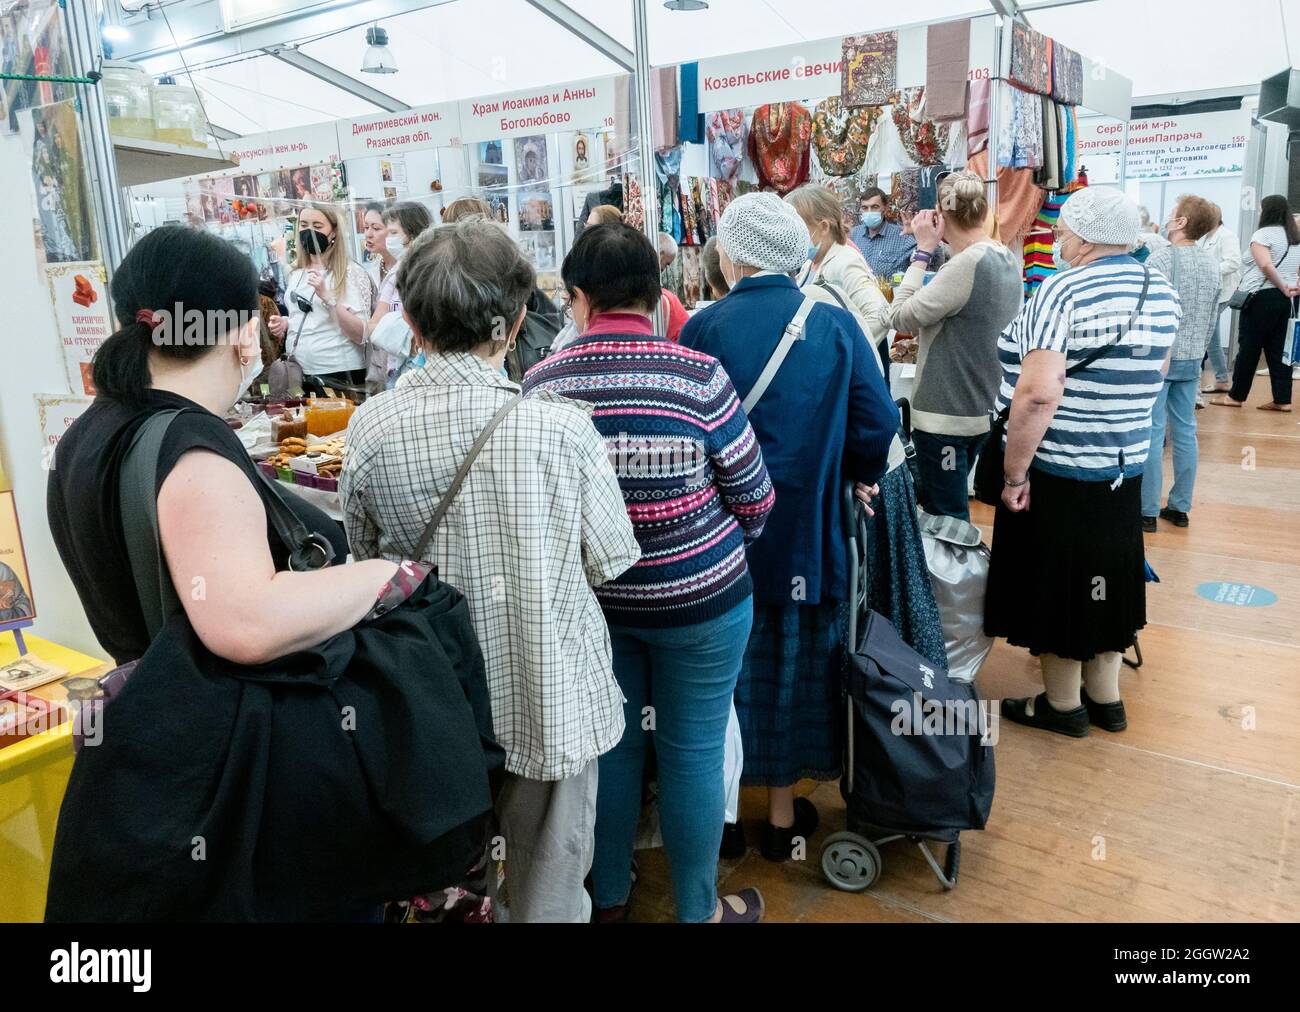 Back view of line of customers at kiosk at Orthodox fair, Moscow, Russia Stock Photo